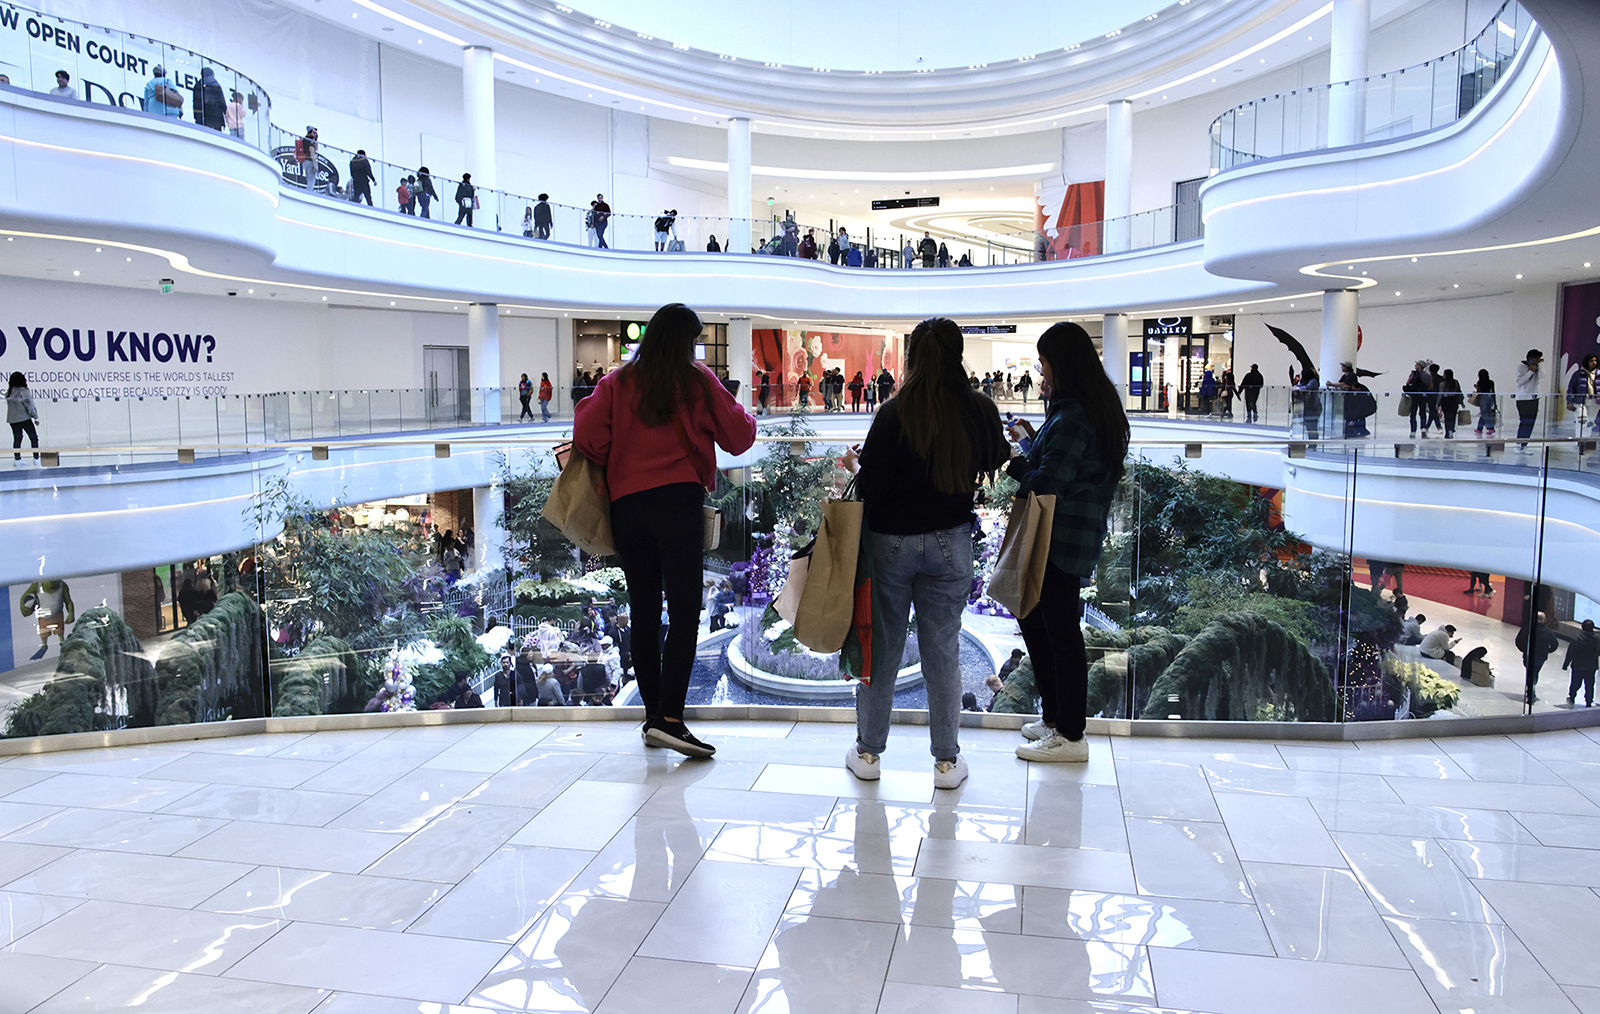 Shoppers visit the American Dream Mall during Black Friday on November 25, 2022 in East Rutherford, New Jersey.